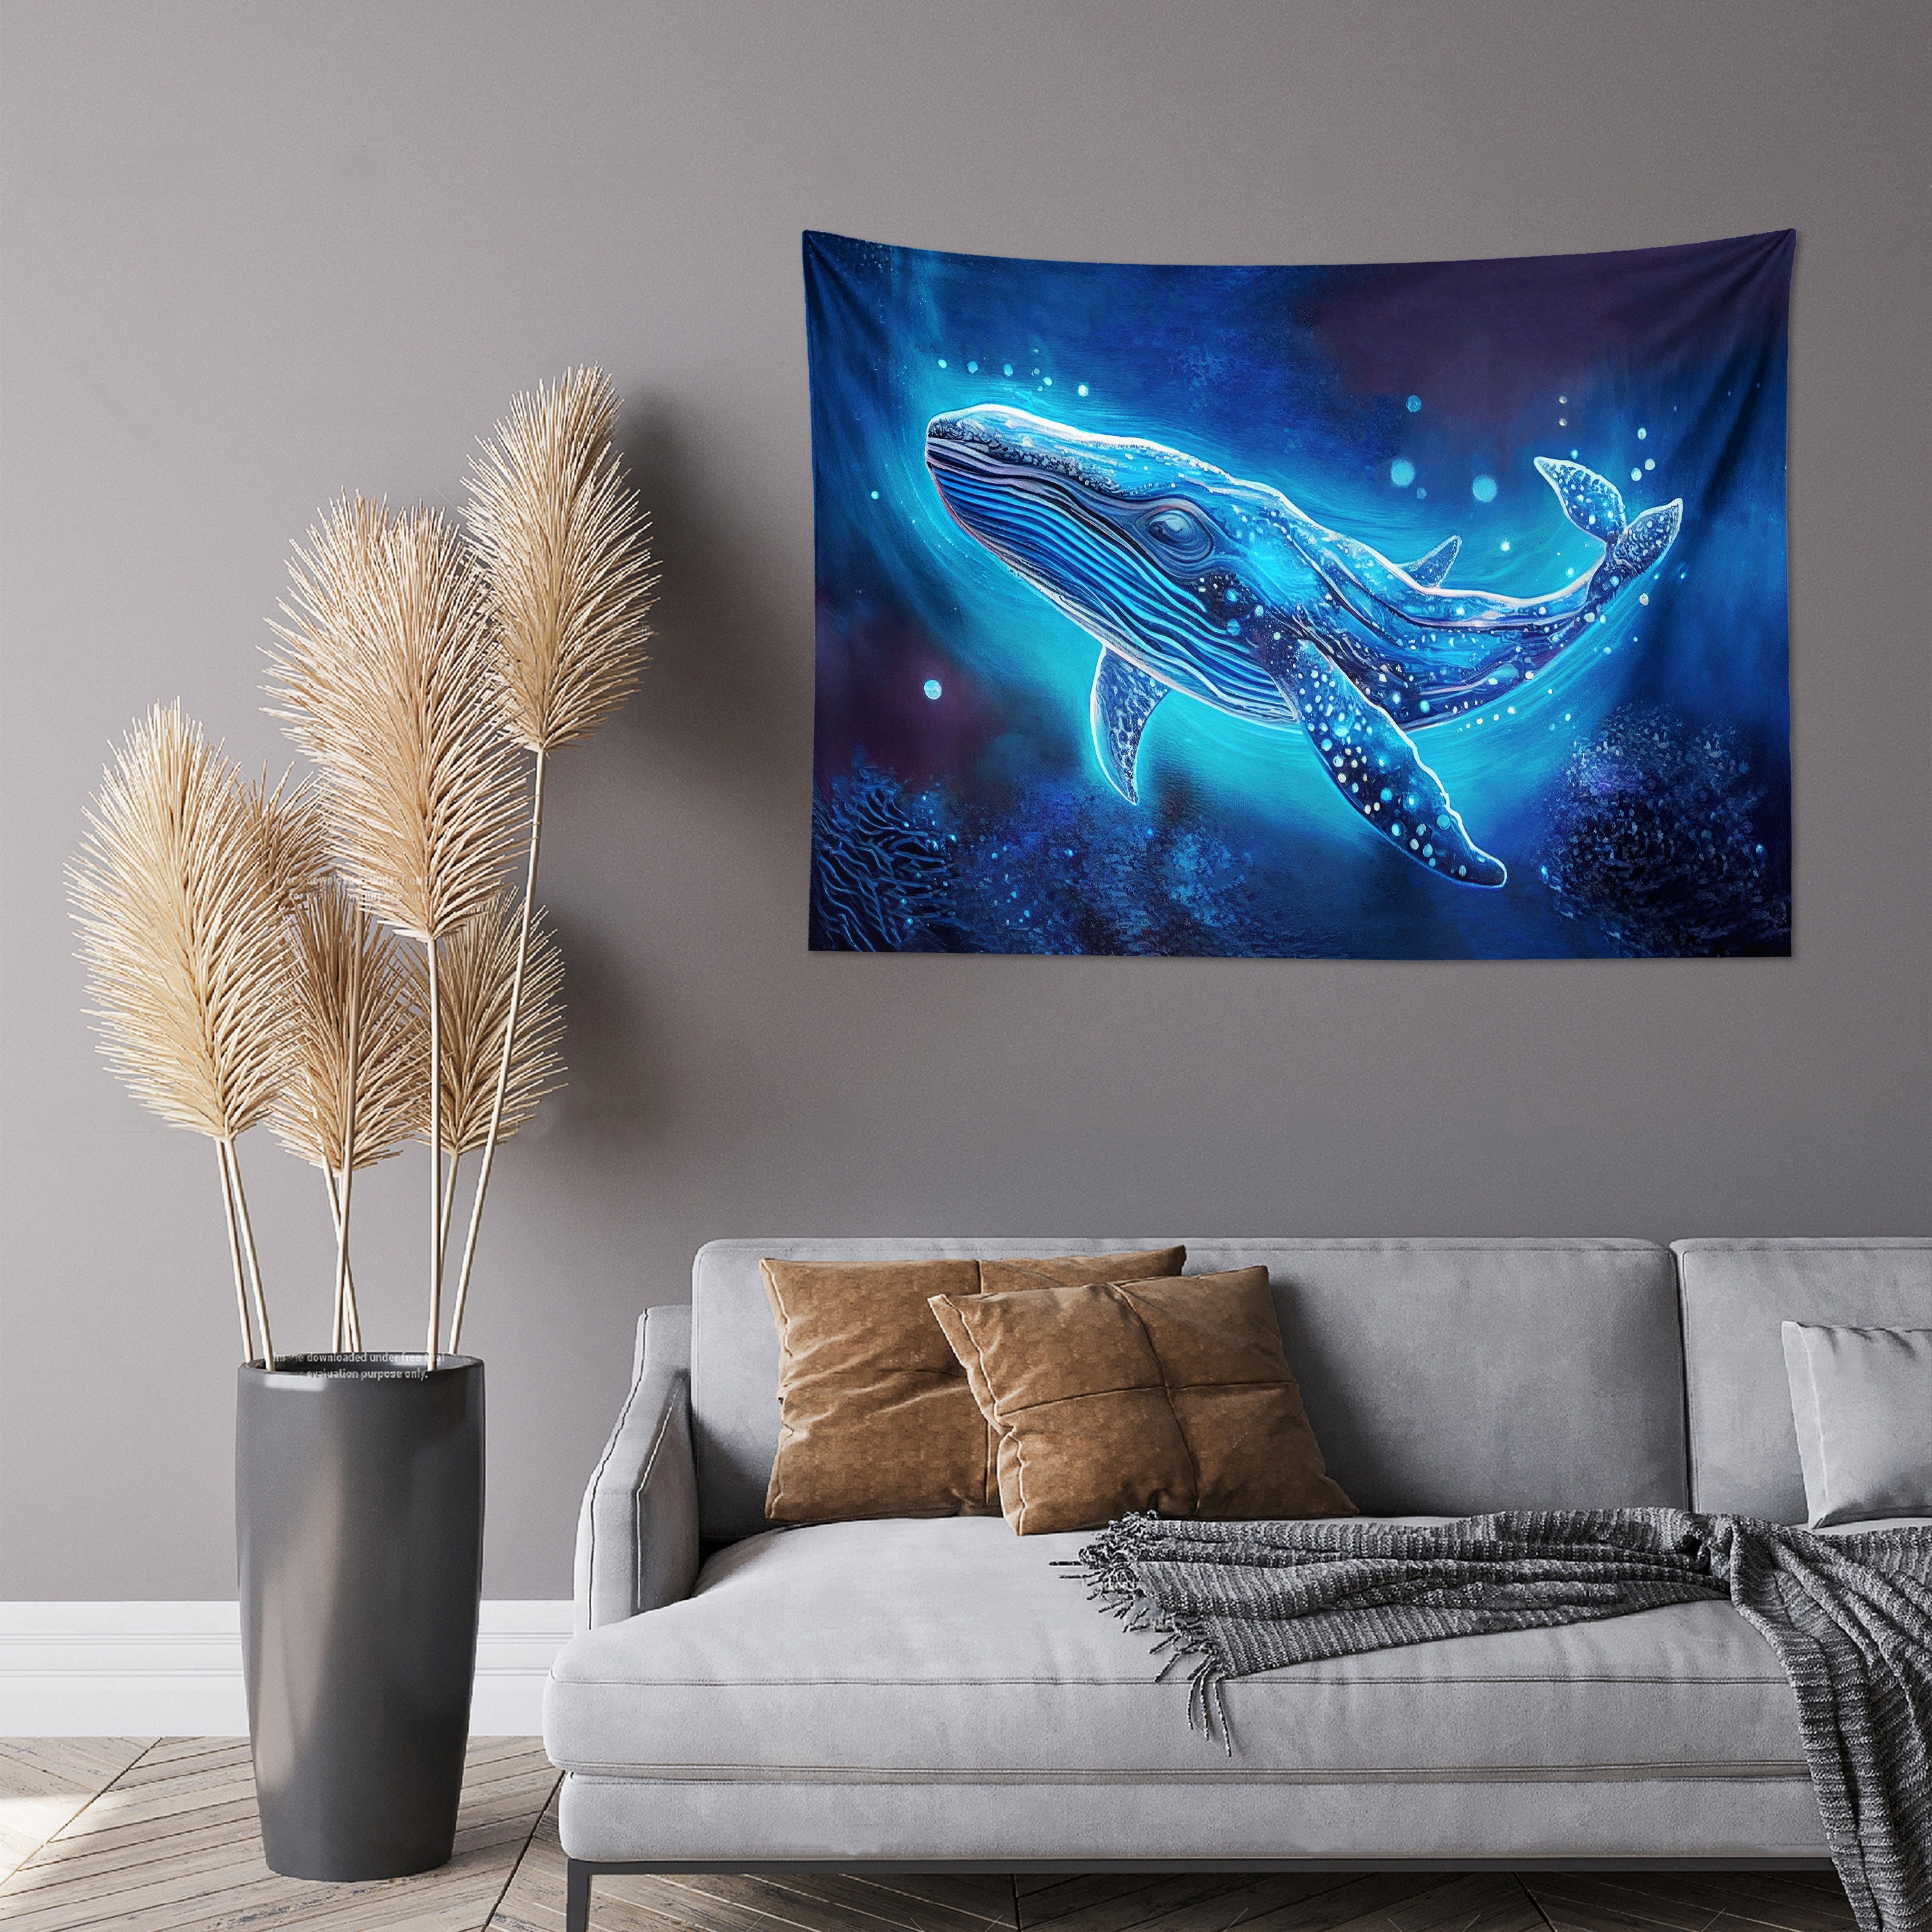 Tulkun Avatar Whale Tapestry Ocean Wave Wall Hanging Art for